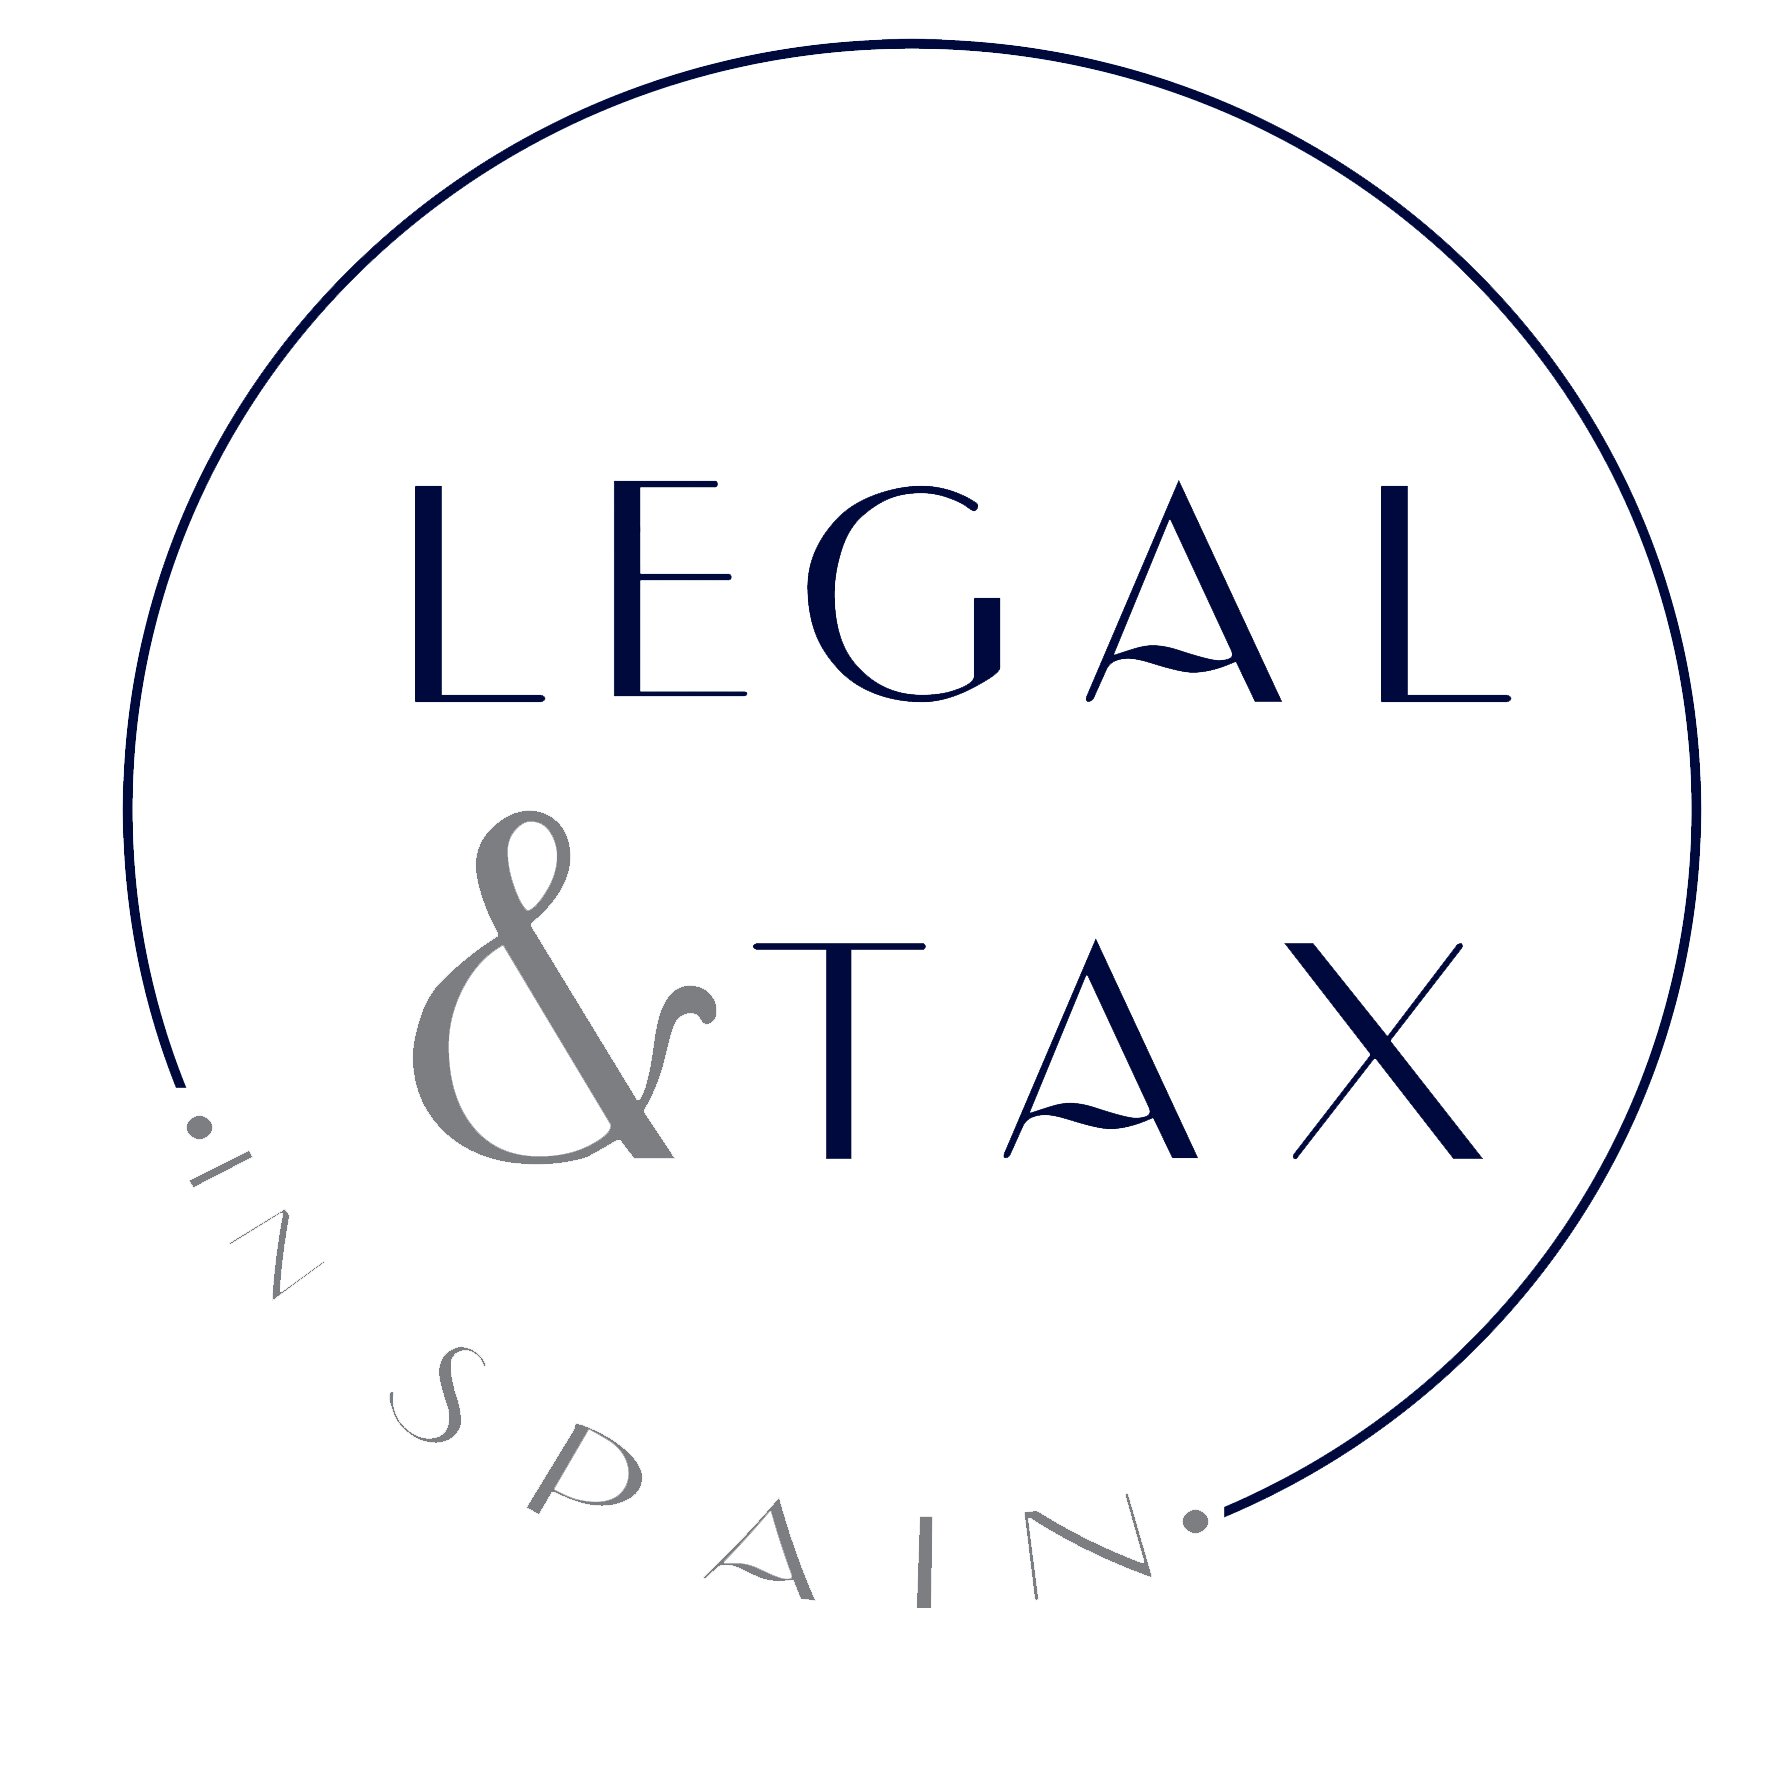 LEGAL&TAXinSPAIN is a firm of bilingual lawyers and chartered accountants who take pride in offering our clients a highly professional and personalized service.